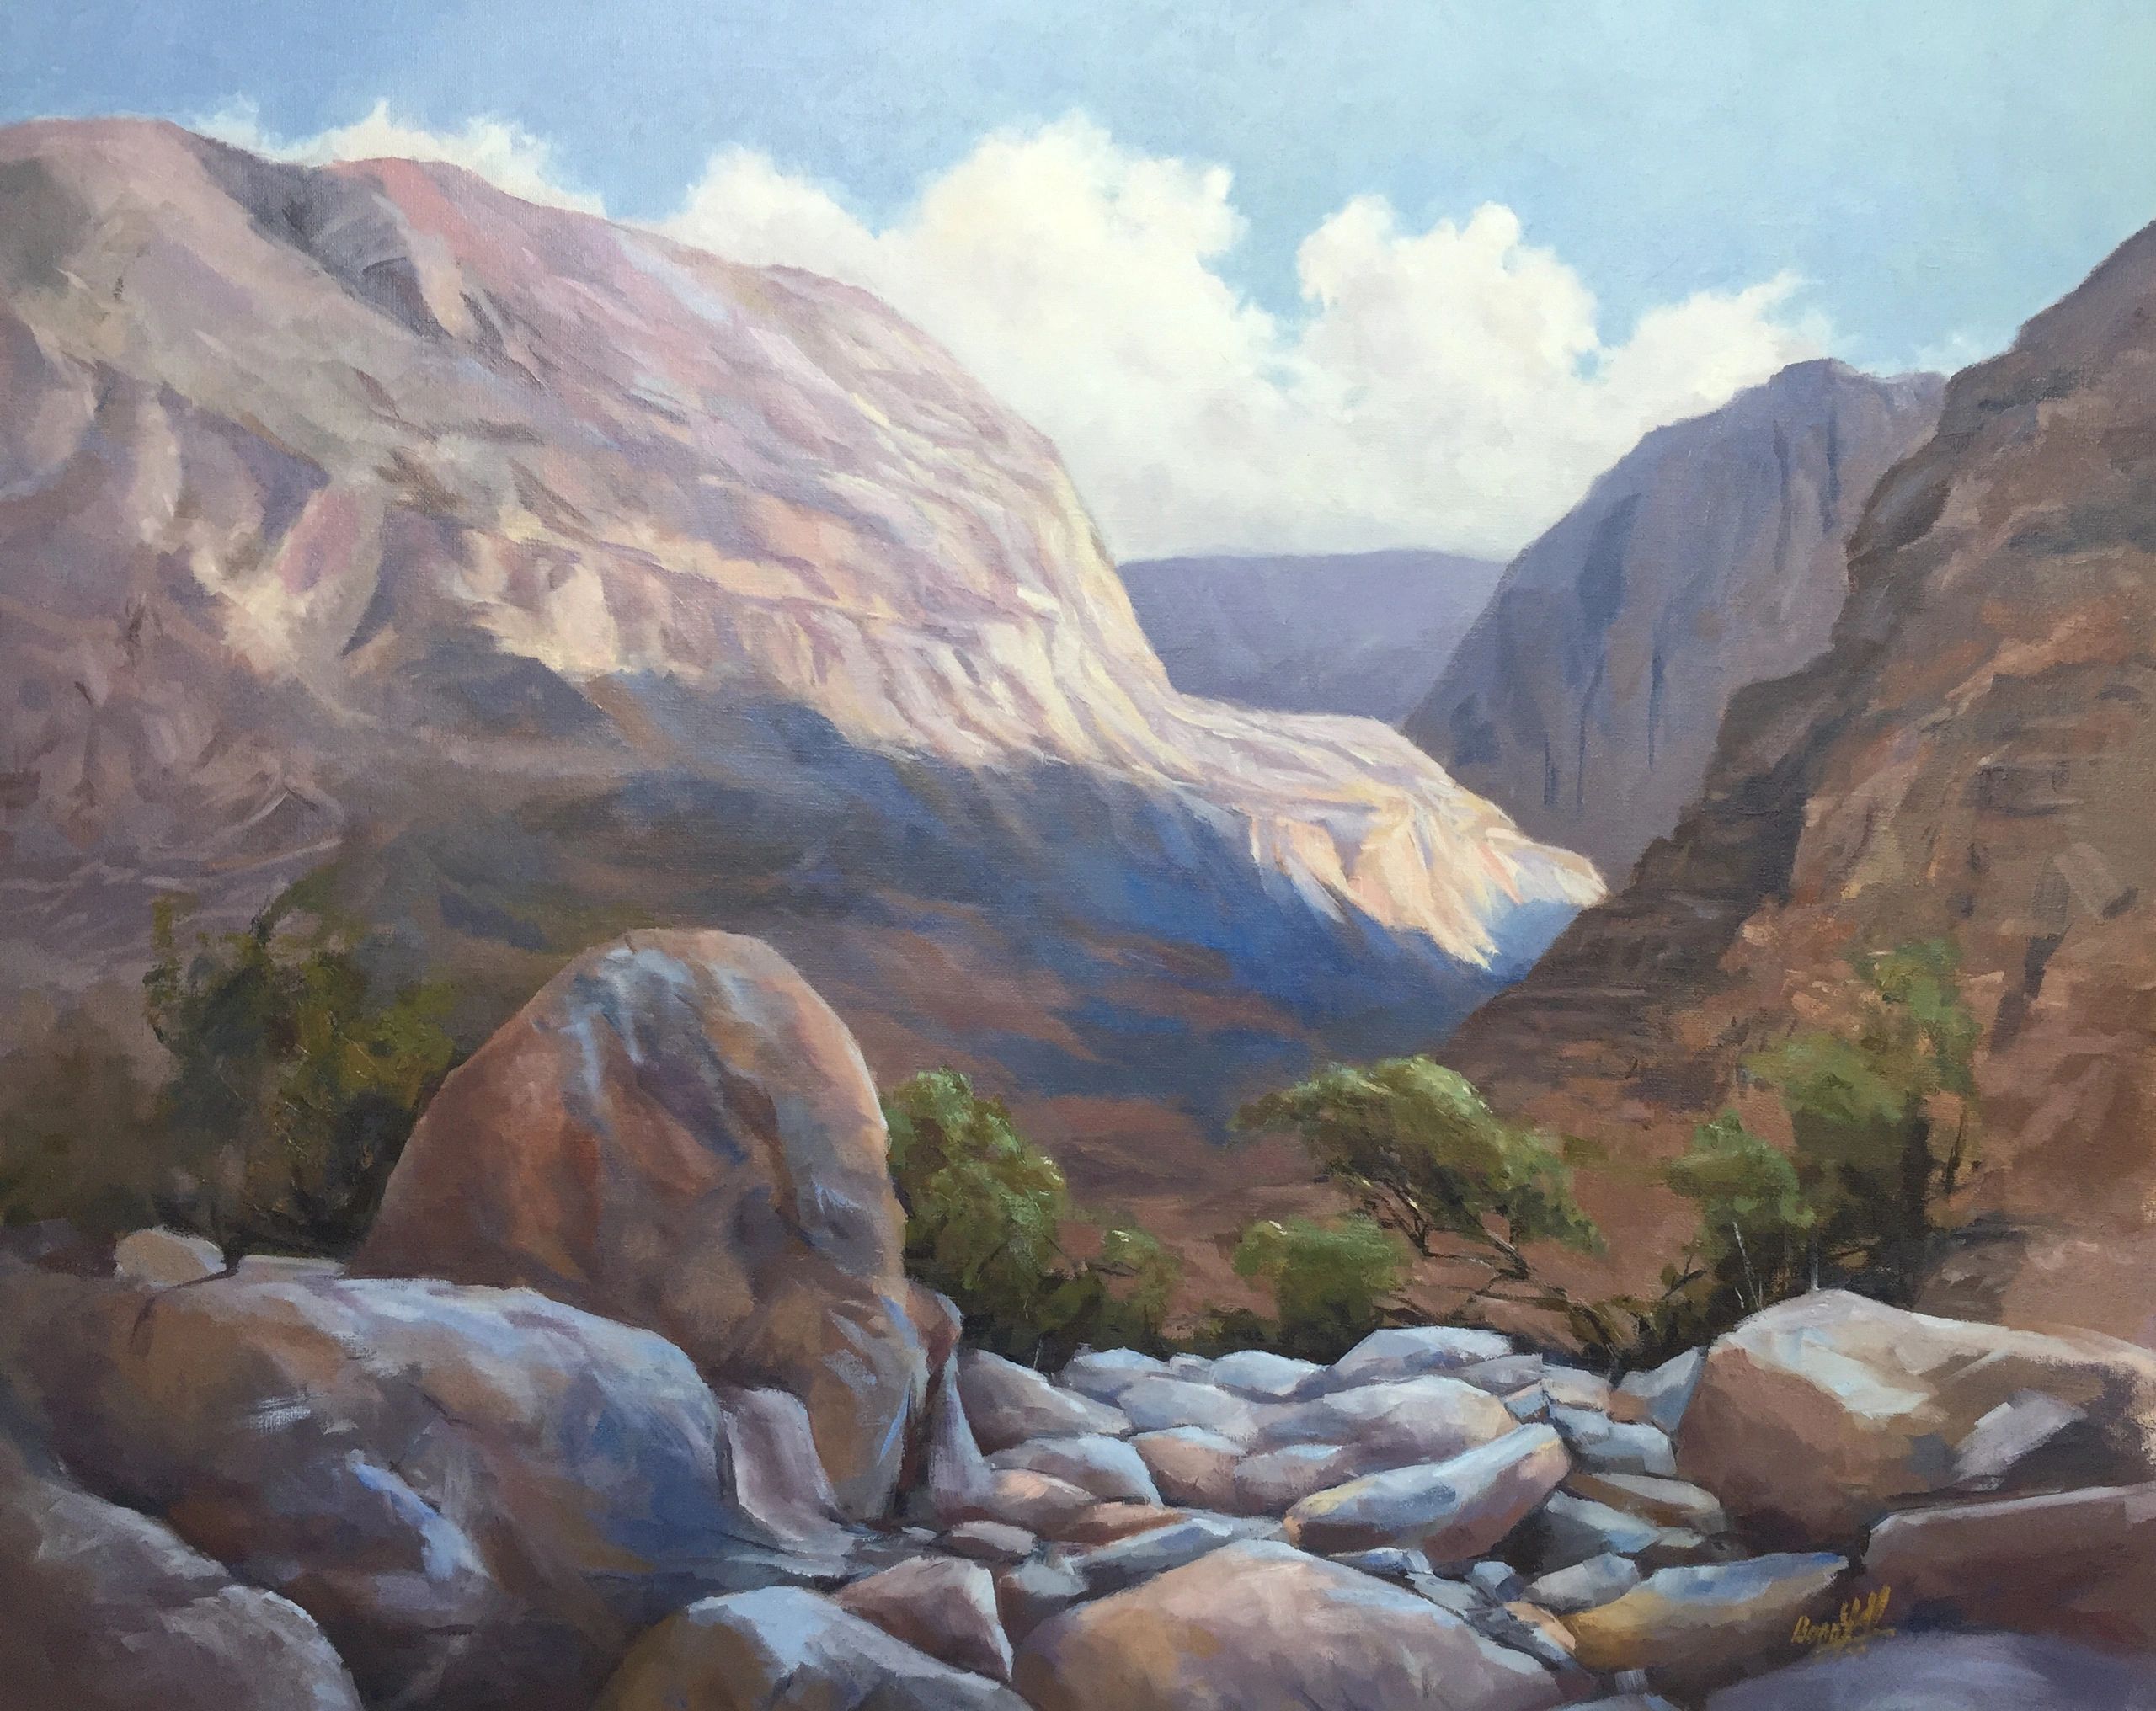 A Morning at Wadi Naqab, Ras Al Khaimah
Oil on linen 30 inches x 36 inches